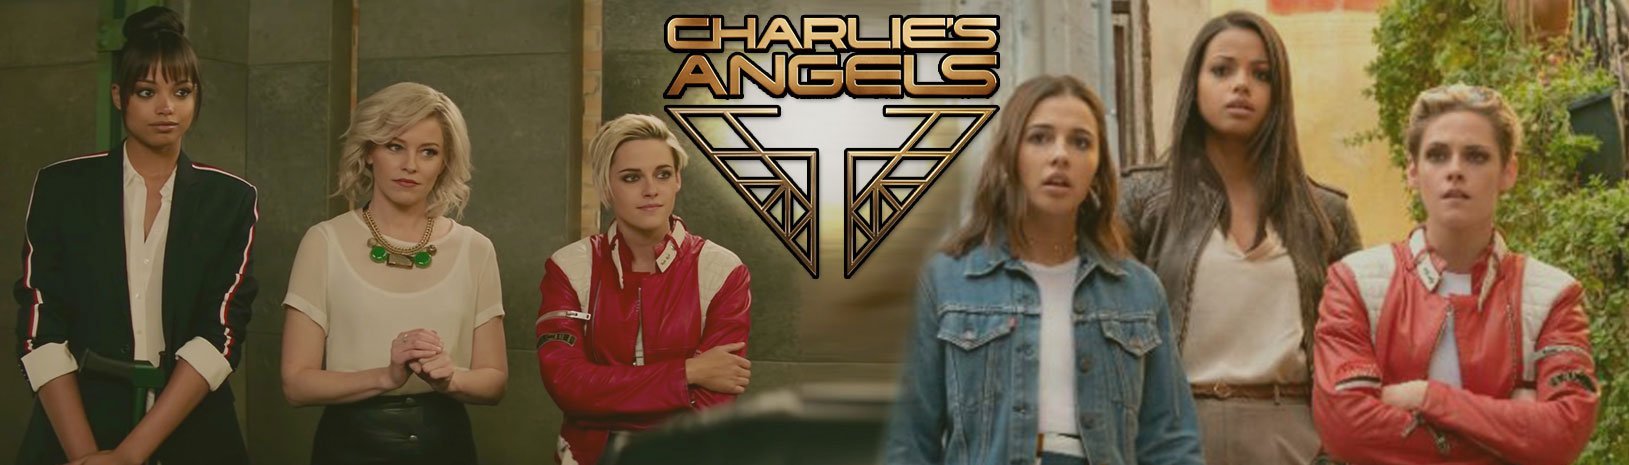 Charlie's Angels Jackets and Coats